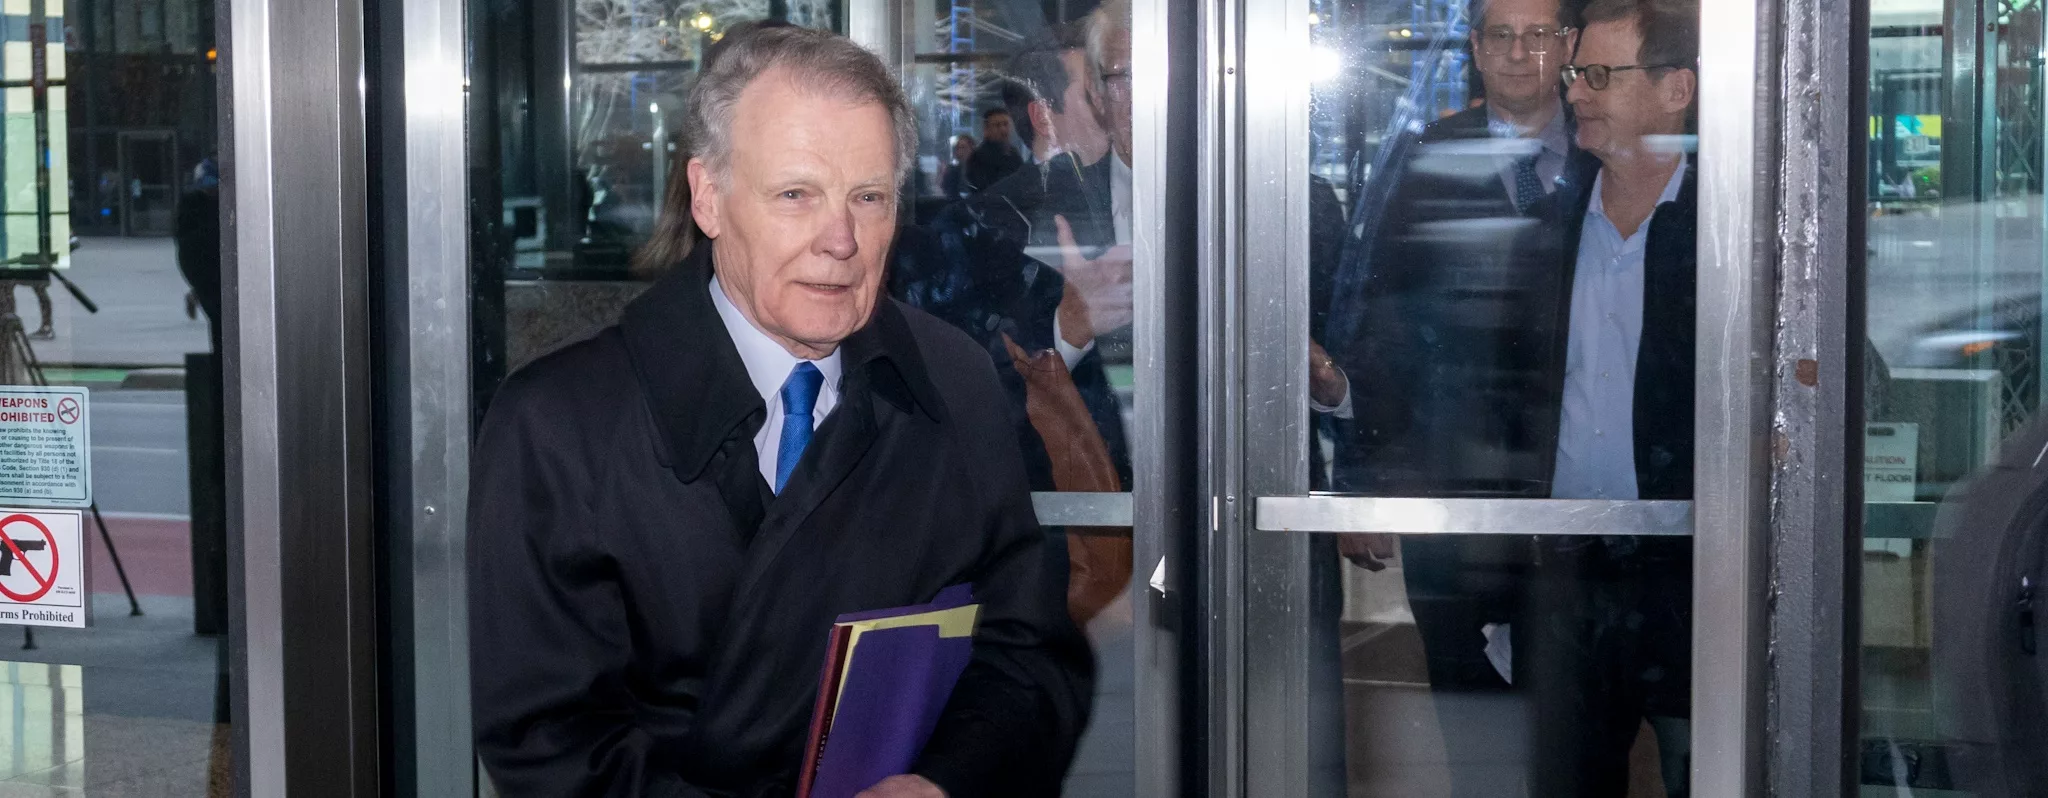 SCOTUS ruling could upend federal corruption cases for Madigan, allies